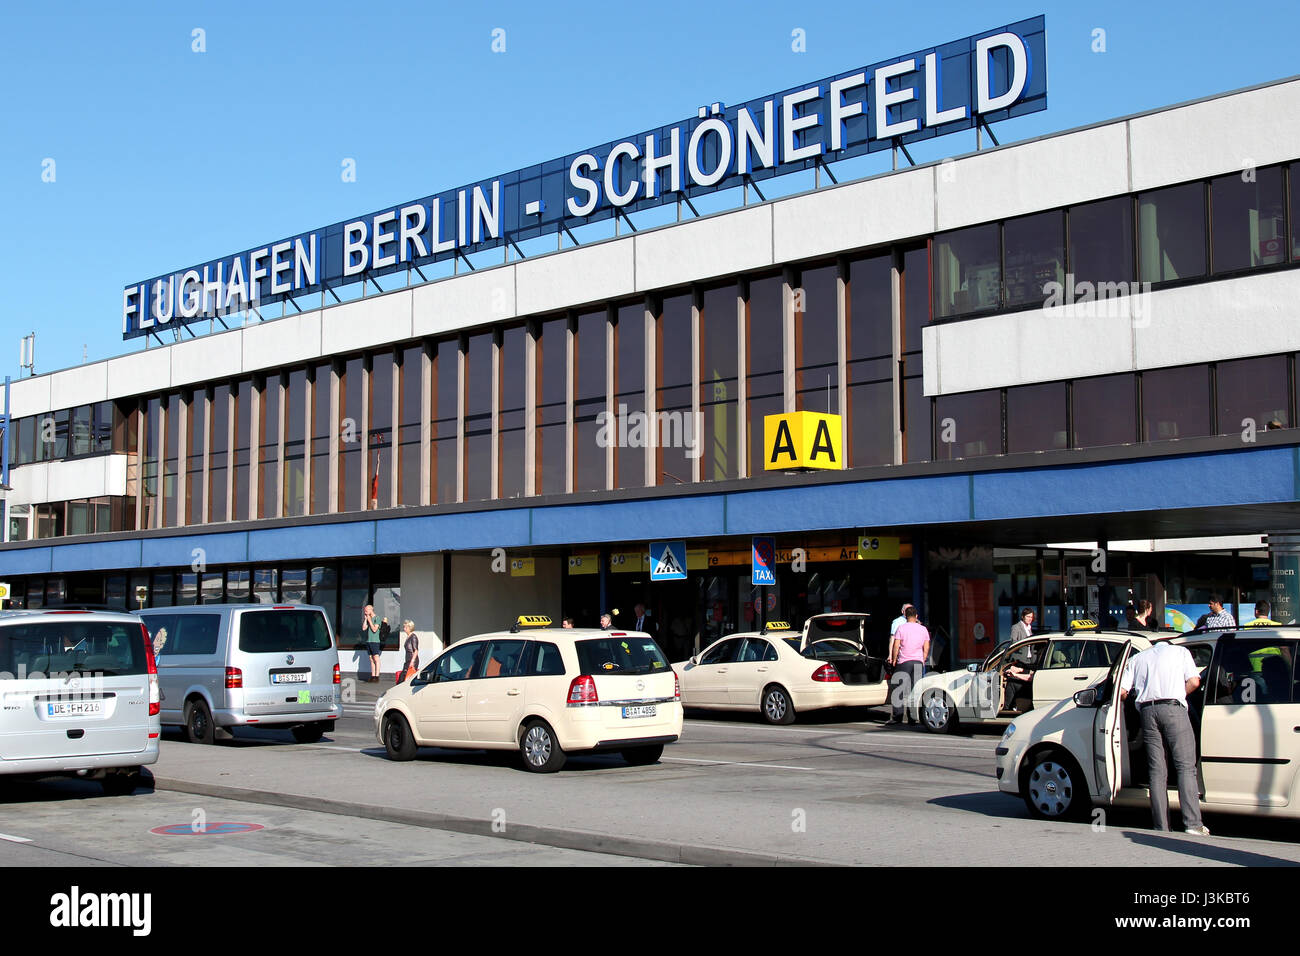 Terminal A of Berlin-Schoenefeld airport. This was the major civil airport of East Germany (GDR) and the only airport of formerly East Berlin. Stock Photo